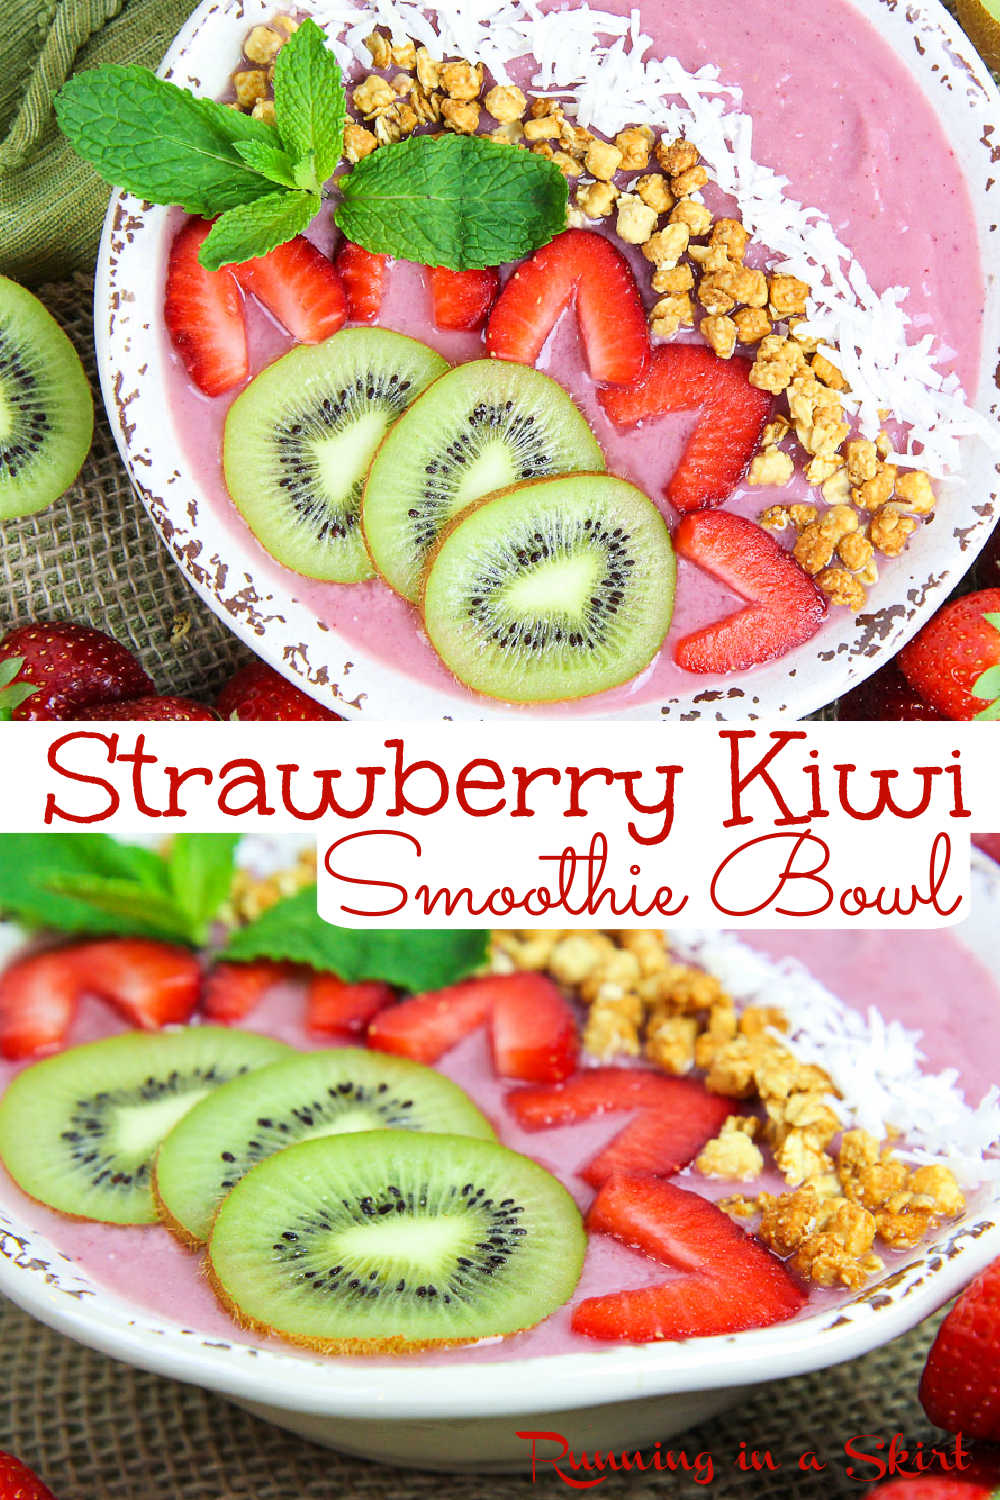 Strawberry Kiwi Smoothie Bowl recipe - A Healthy Strawberry Smoothie Bowl recipe with strawberry, kiwi, banana and protein powder. Great clean eating smoothie bowls recipe for breakfast or a healthy snack. Easy, simple and topped with granola and coconut. You will love this thick smoothie bowl recipe with kiwi - only 5 ingredients! Vegan, Vegetarian, Gluten Free, Dair-Free / Running in a Skirt #vegan #smoothiebowl #vegetarian #cleaneating #healthyliving #smoothie #glutenfree via @juliewunder